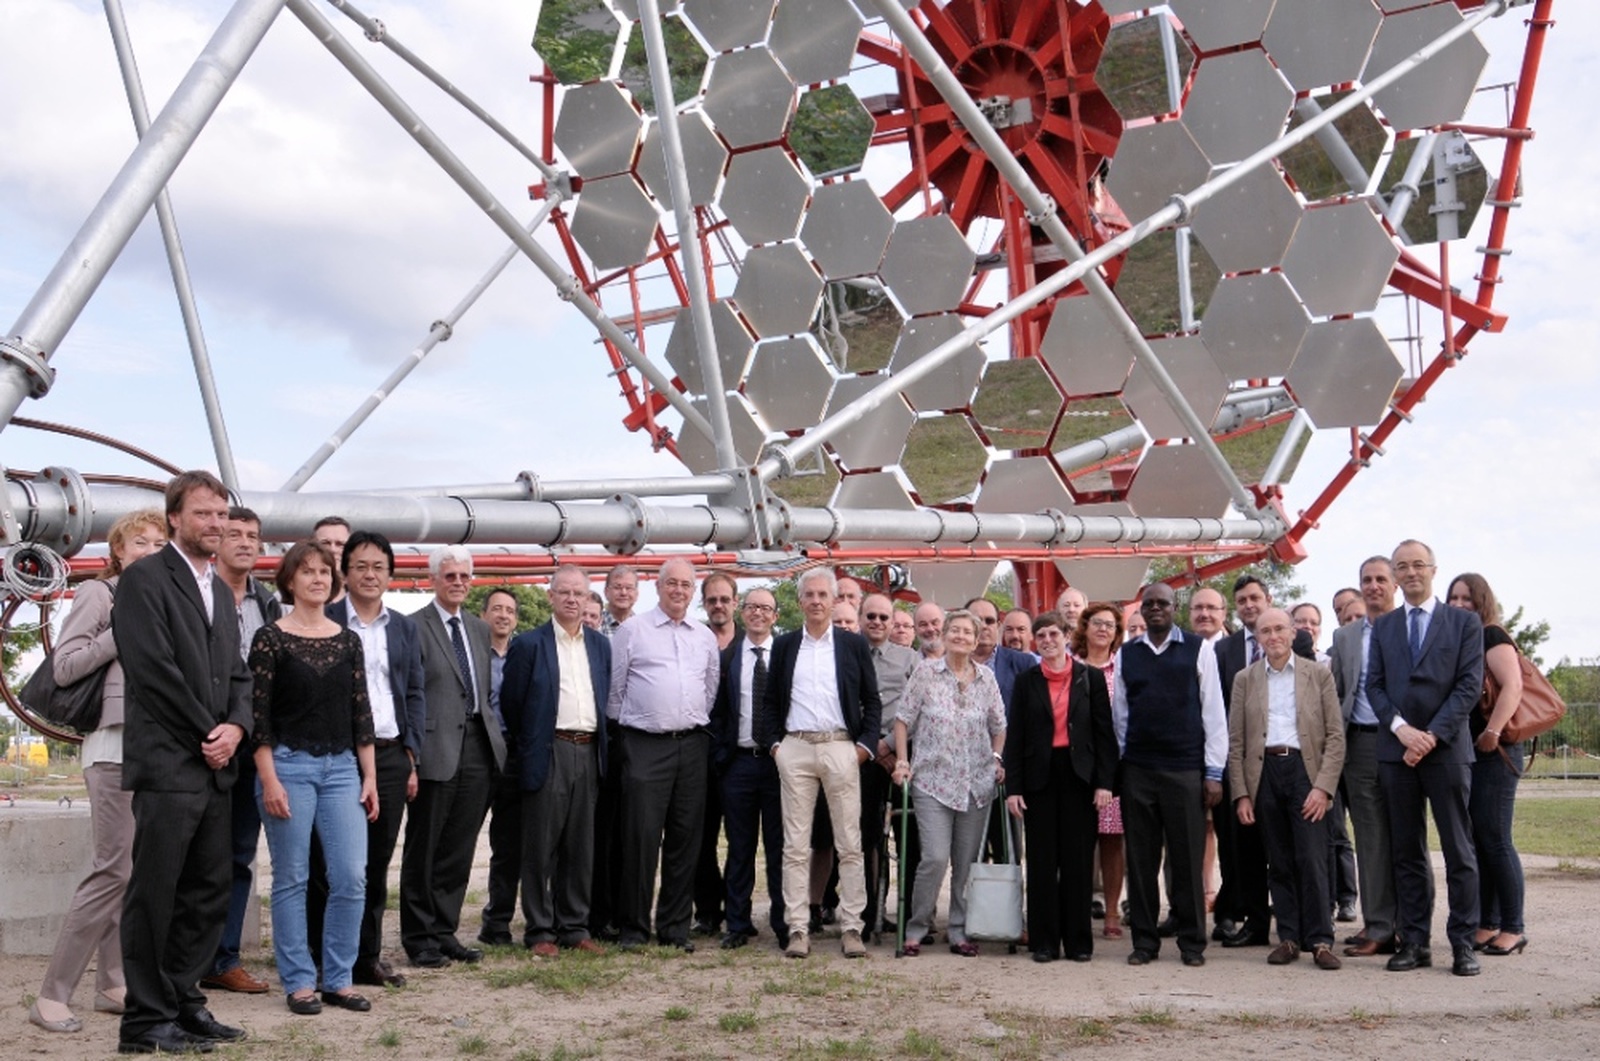 The members of the Resource Board last week in Zauthen near Berlin, Germany. In the background, we can see one of the prototypes of the telescope.